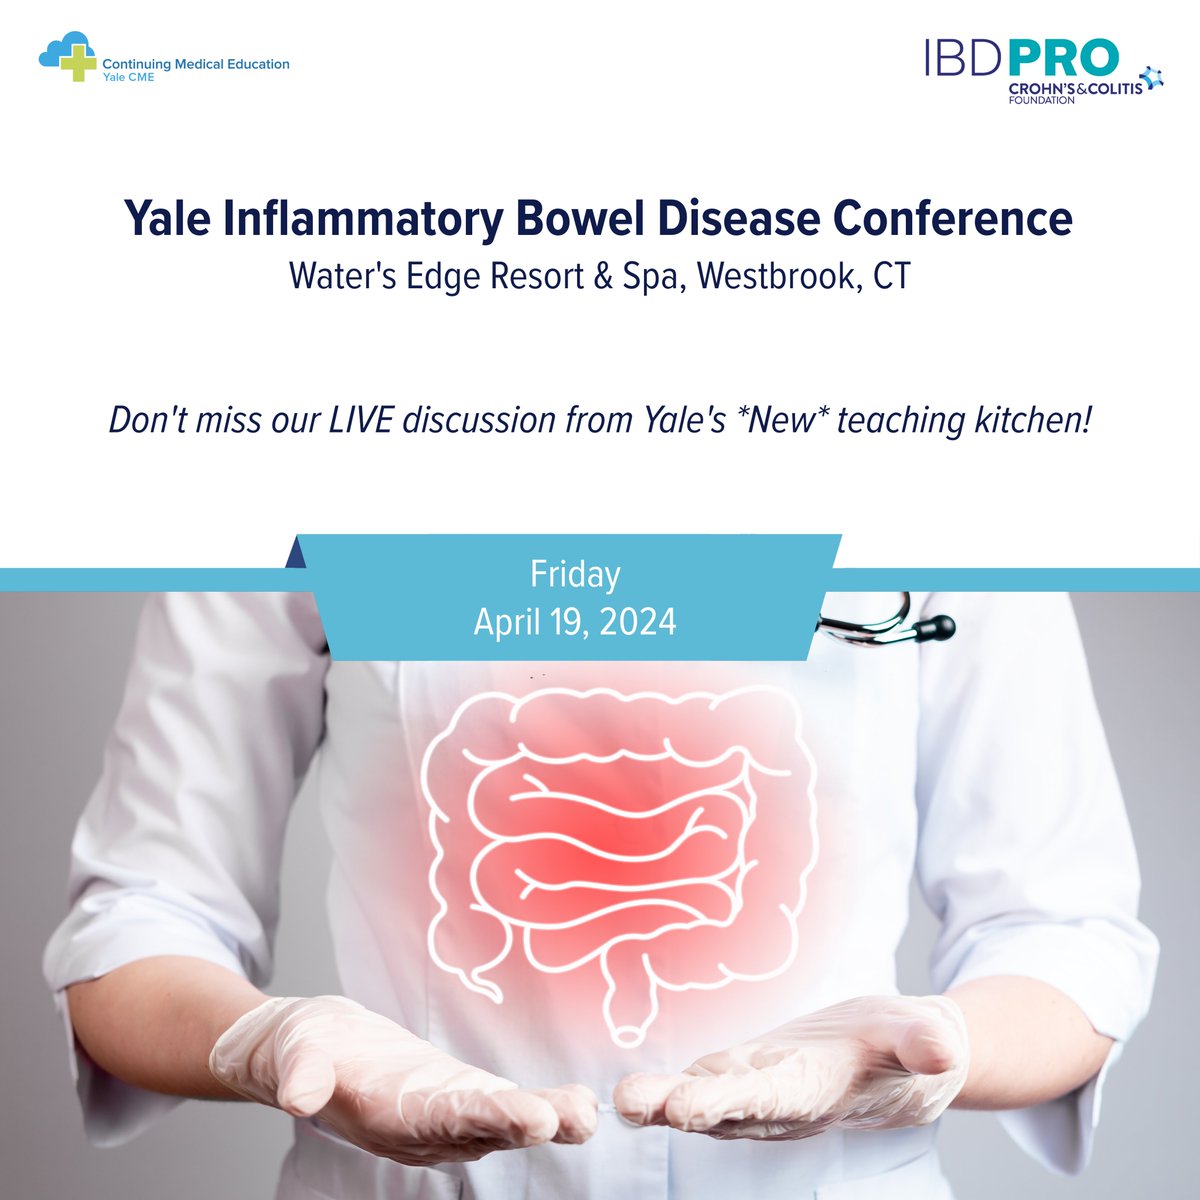 Join us at Water's Edge Resort on the CT shoreline this Spring! Learn the latest care principles for IBD from world-class professionals & enjoy live discussions from Yale's new teaching kitchen. Register for an unforgettable experience! shorturl.at/kmpw1 @YaleDigestive